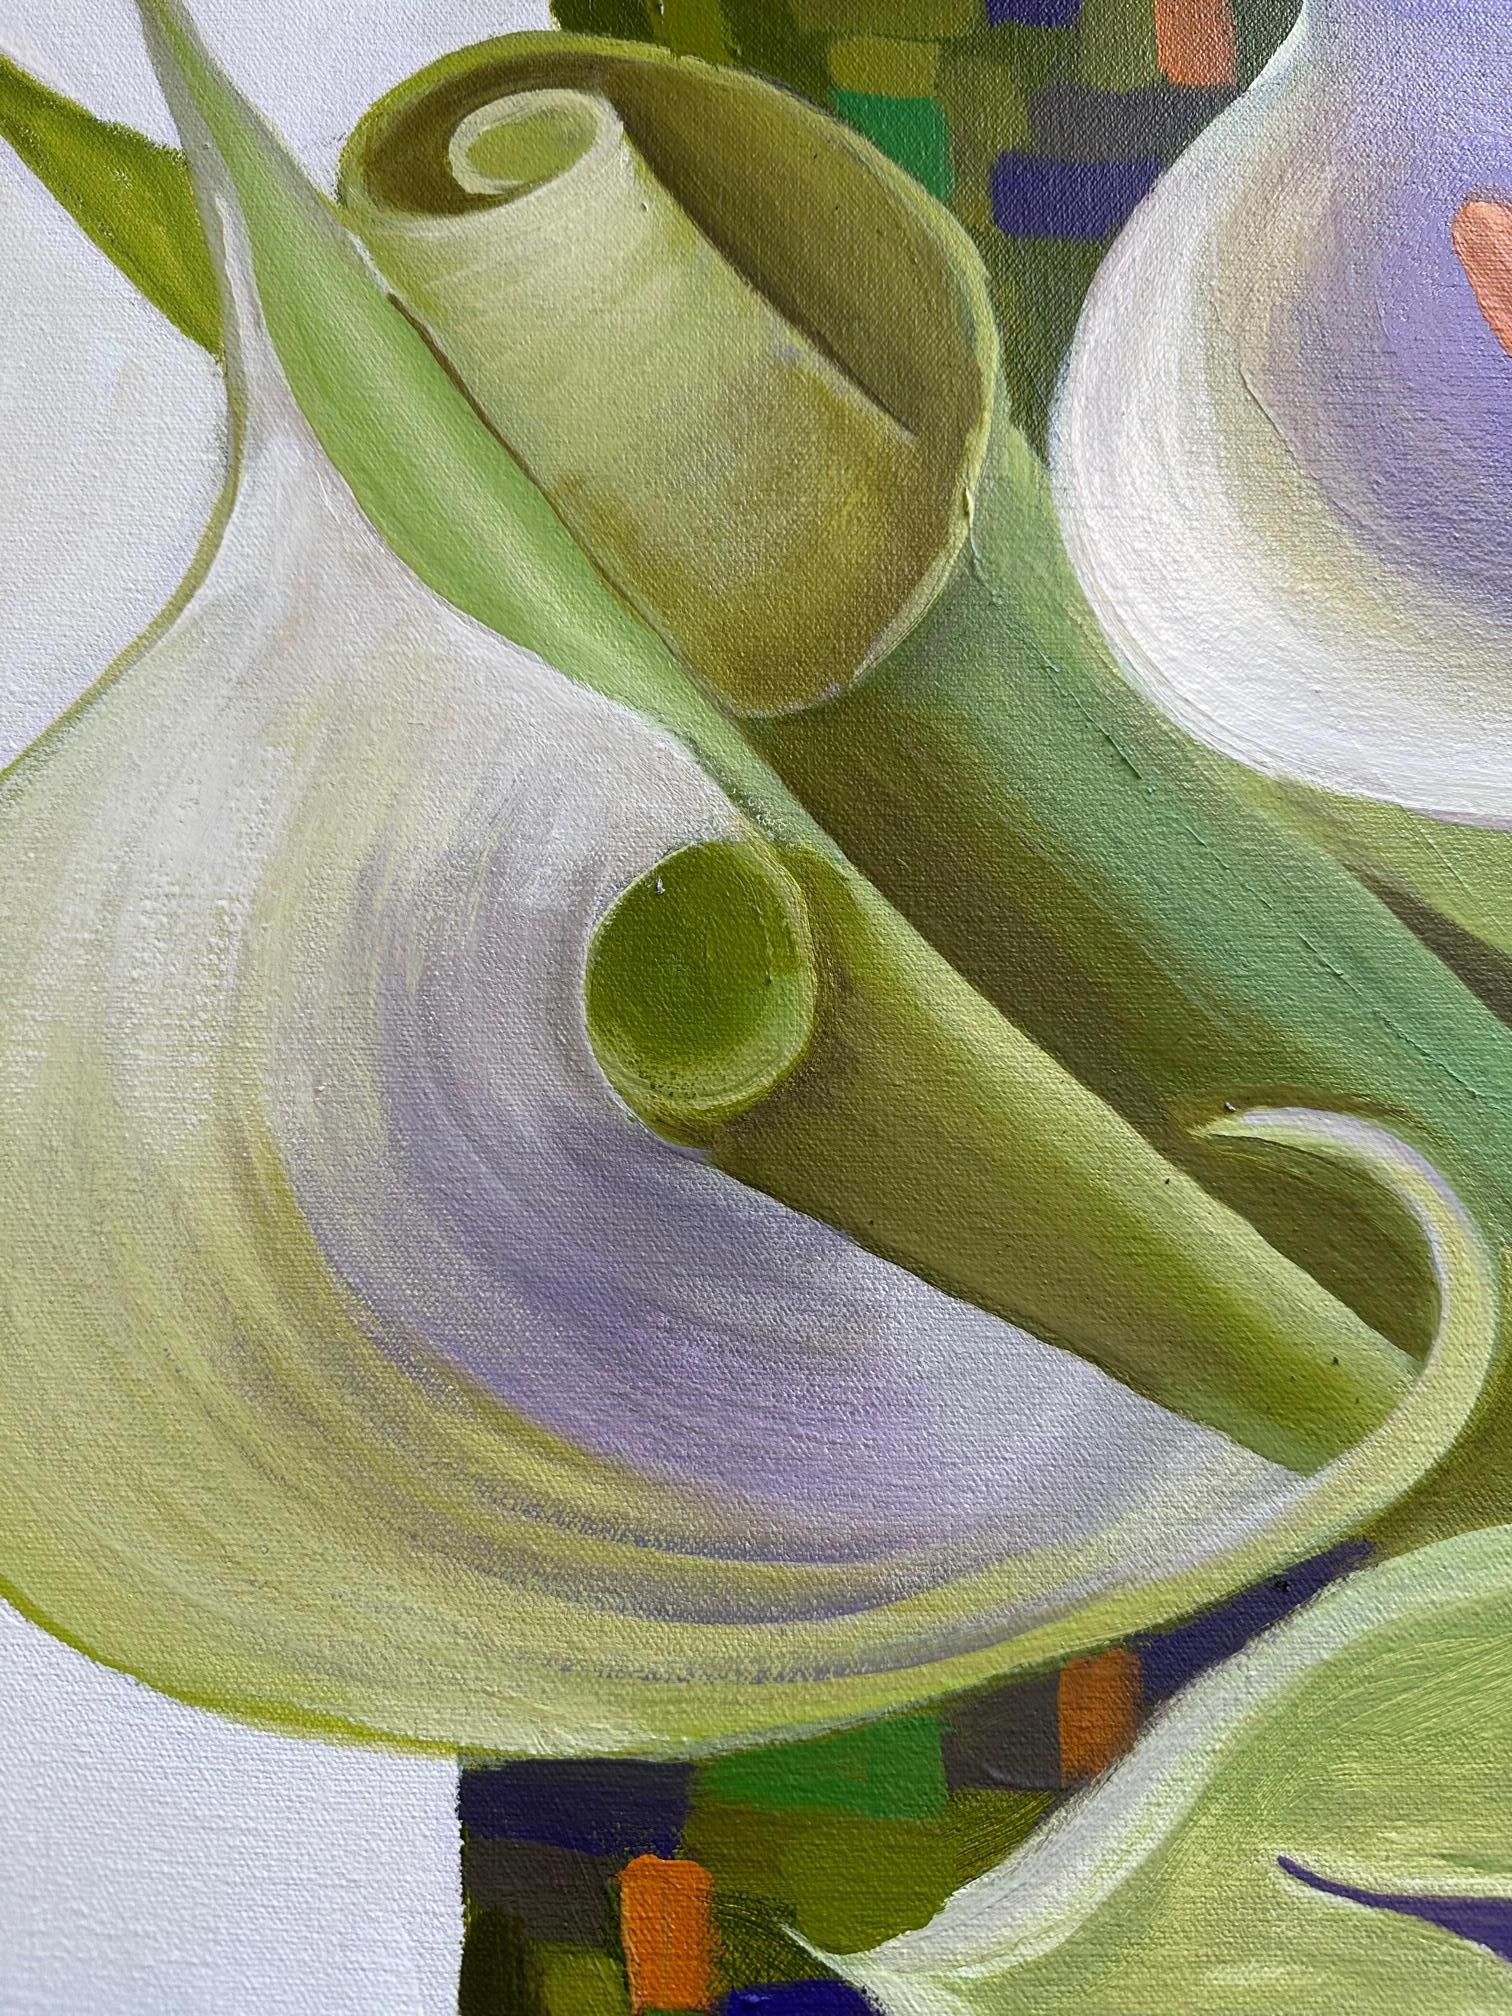  'Contained, Yet Expanding' - Calla Lily Flowers -  Marc Zimmerman For Sale 4